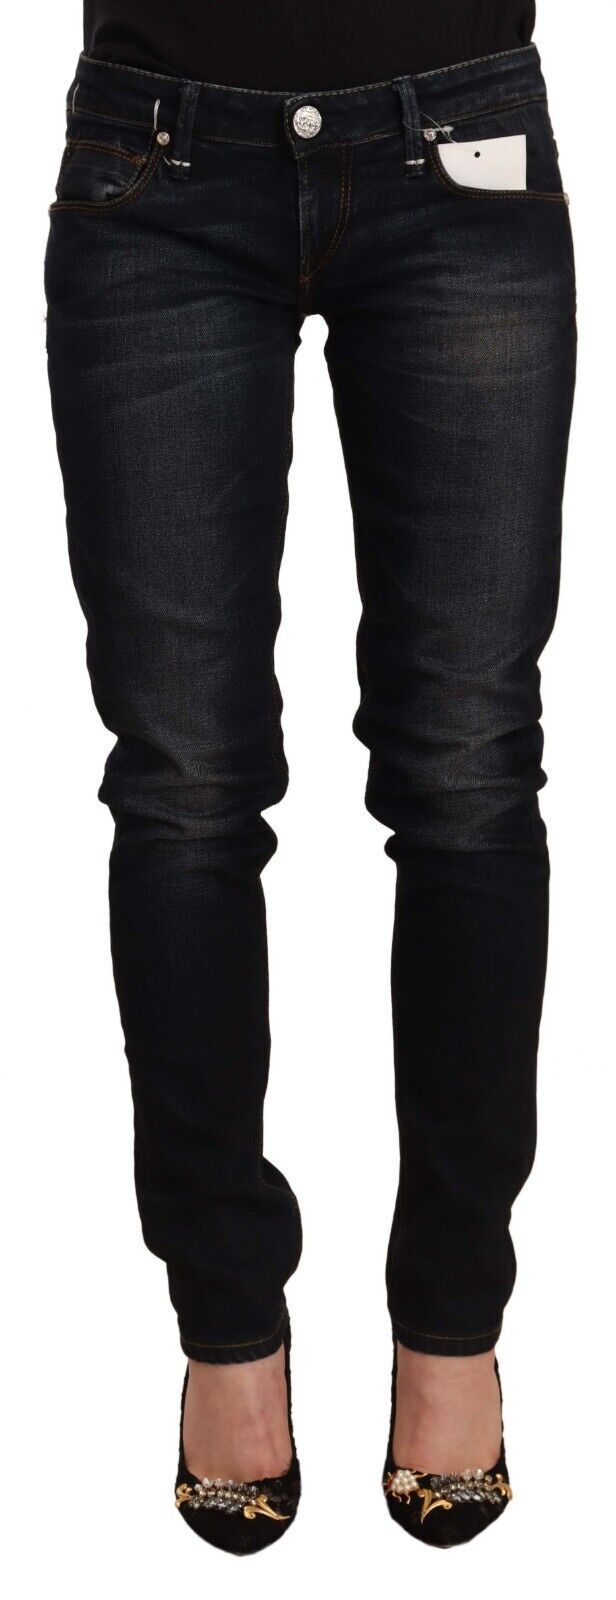 Acht Chic Black Washed Skinny Jeans for Women's Her